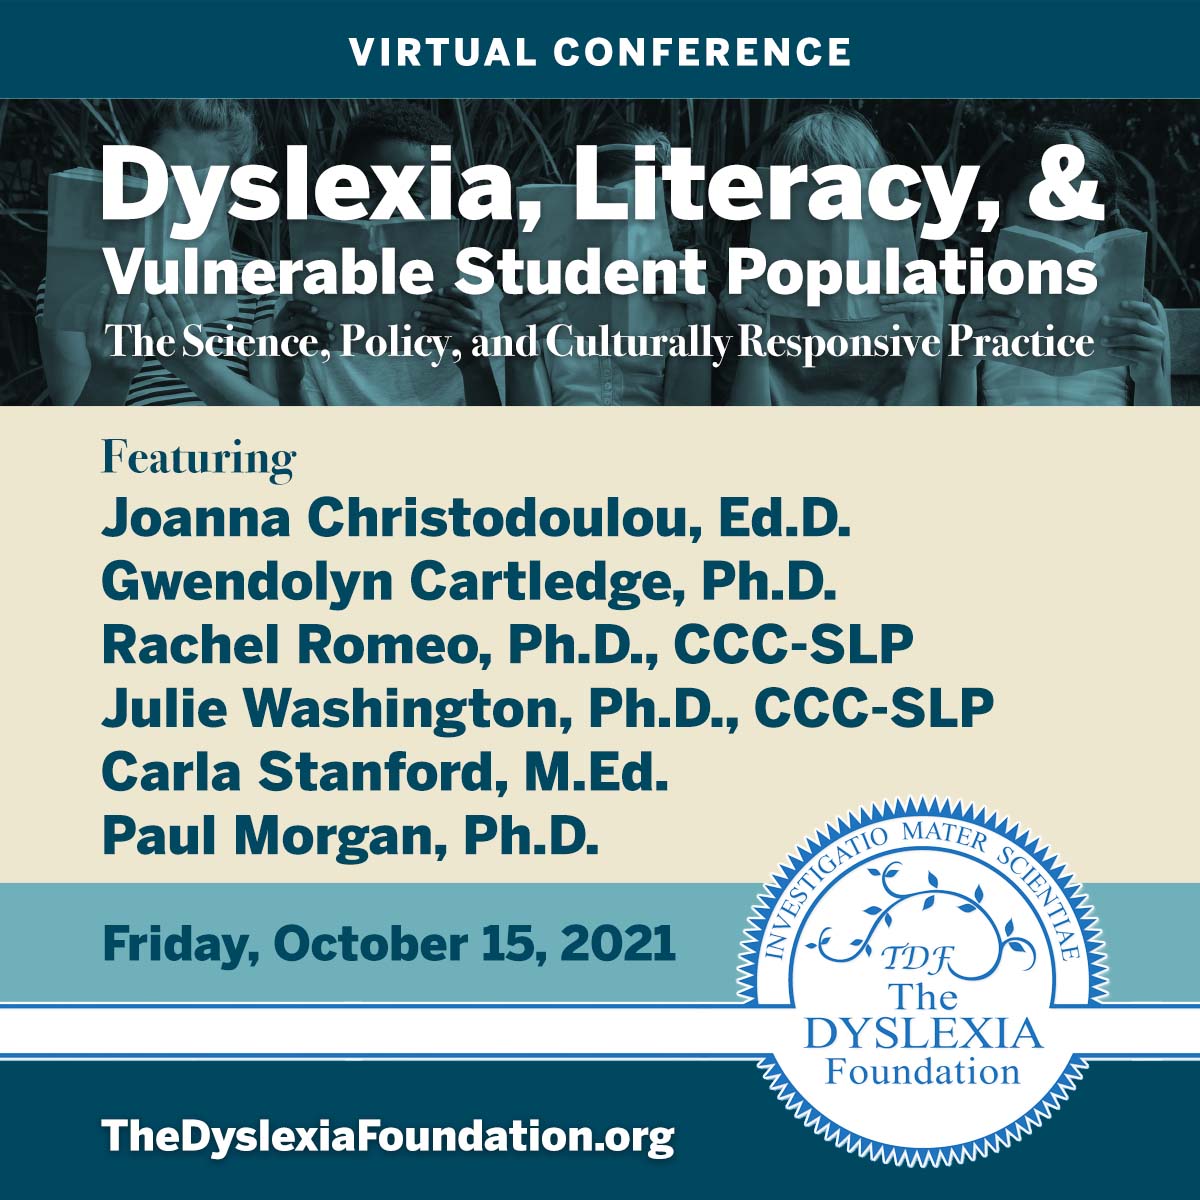 Limited time to register!!!! This Friday! Dyslexia, Literacy & Vulnerable Student Populations. Dr. Julie Washington will be speaking on 'Assessing Children who are Historically Underserved: Understanding and Adjusting for Inherent Complexities' Register: buff.ly/2MKVA2f